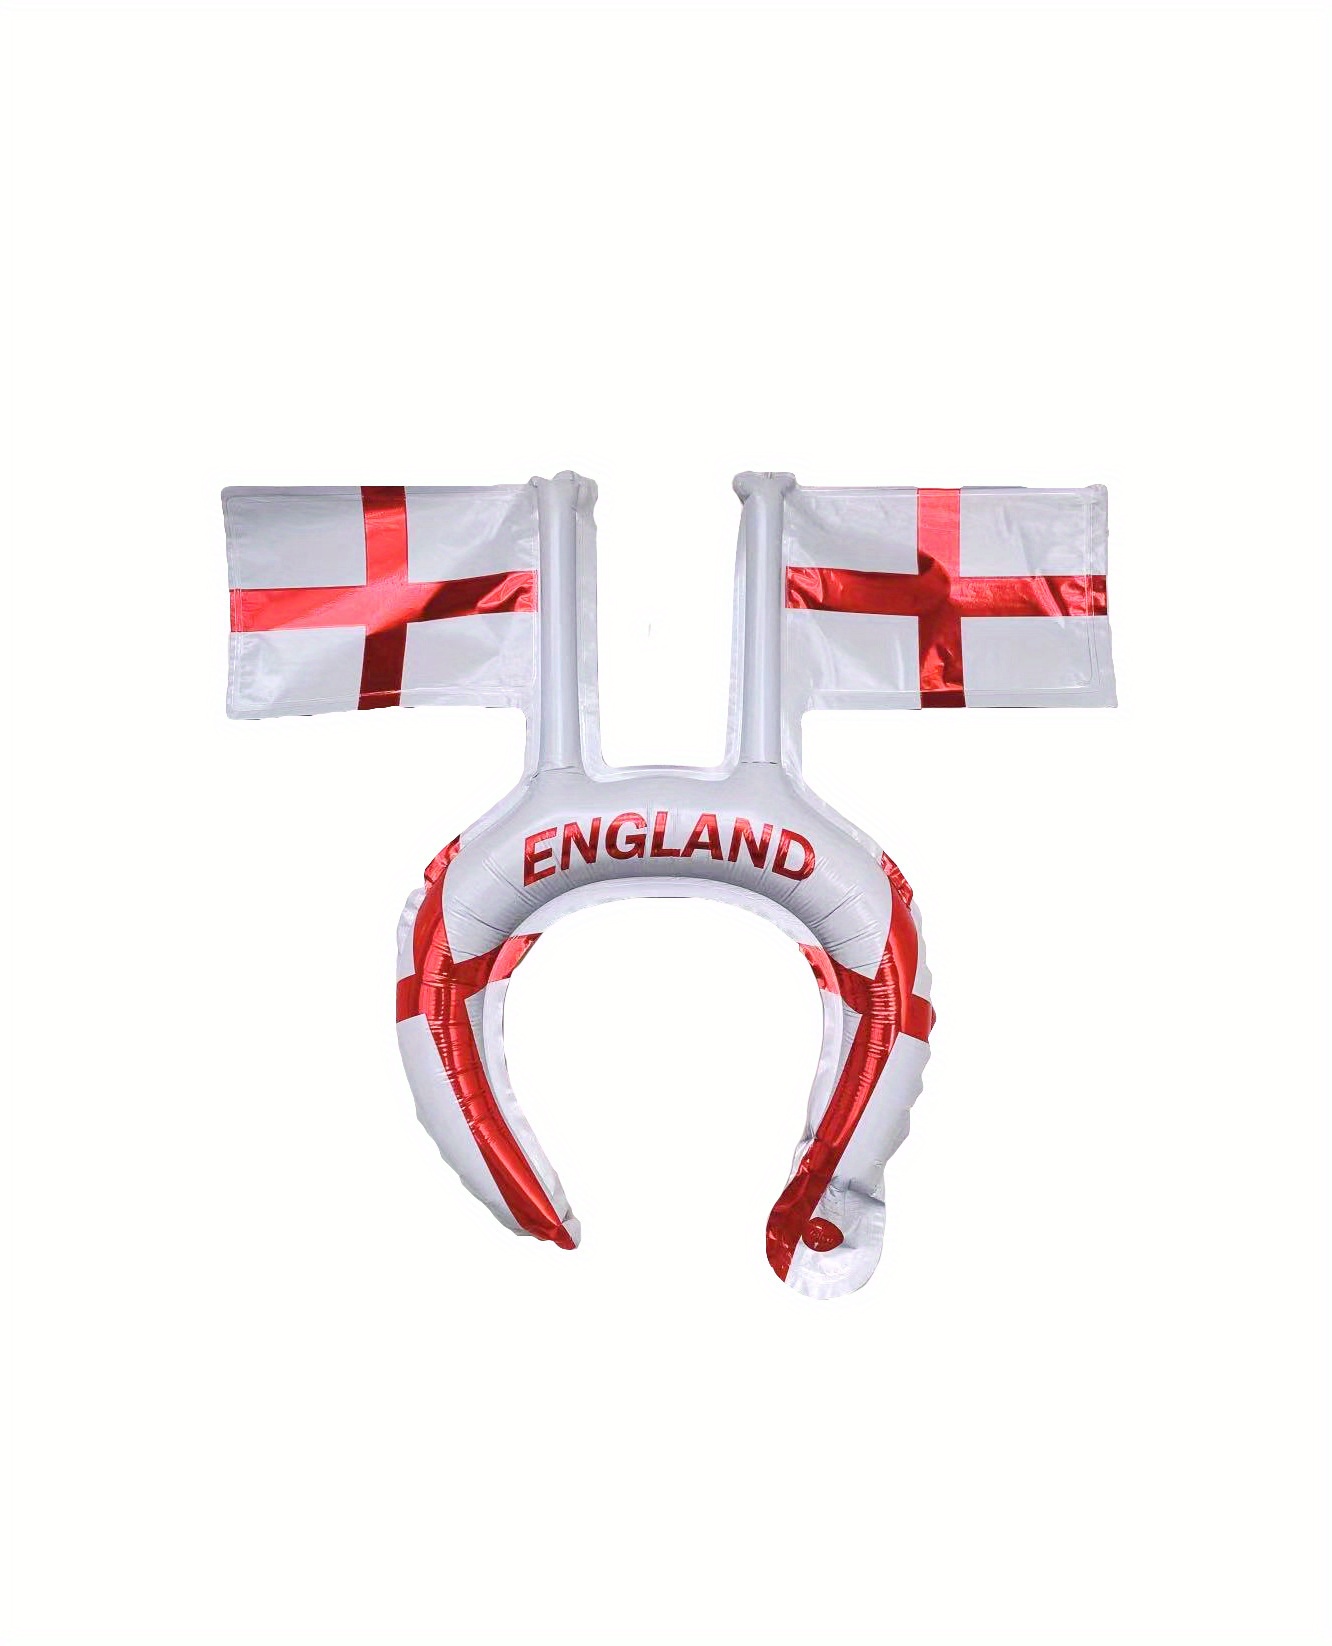 2024 supporter gear set of 2 inflatable headband balloons for fans no electricity event party headwear with   belgium england festive soccer cheer accessories details 5